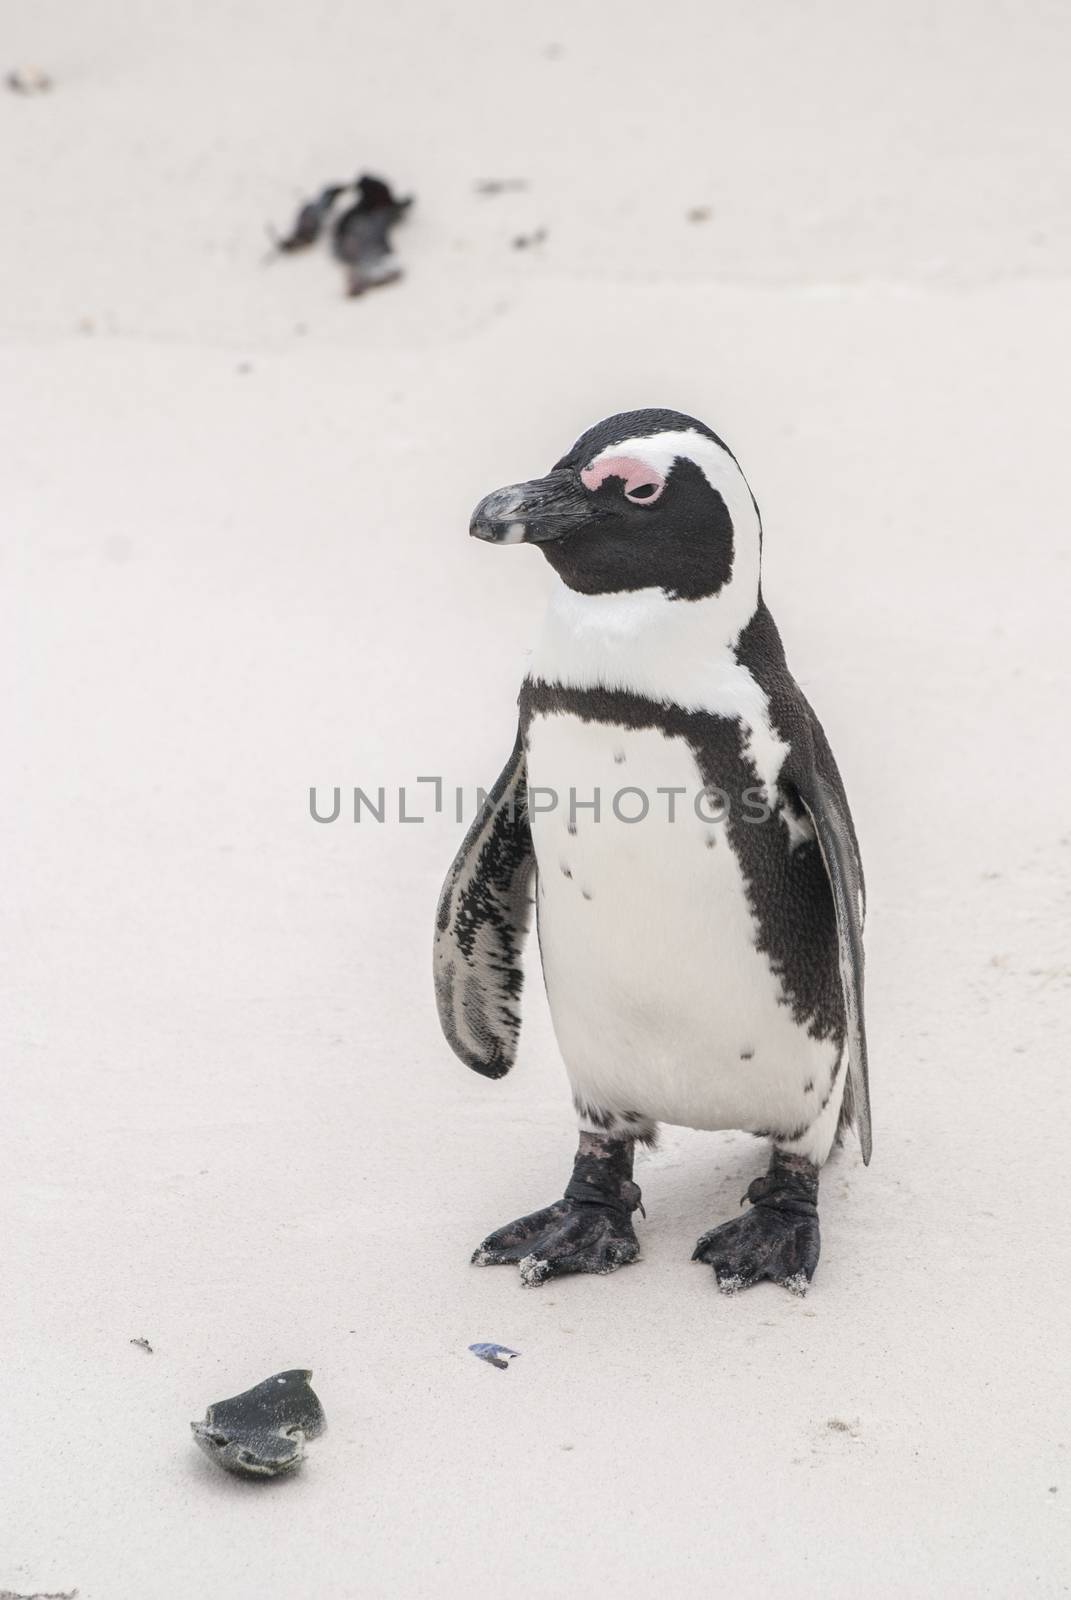 African penguin by Anna07